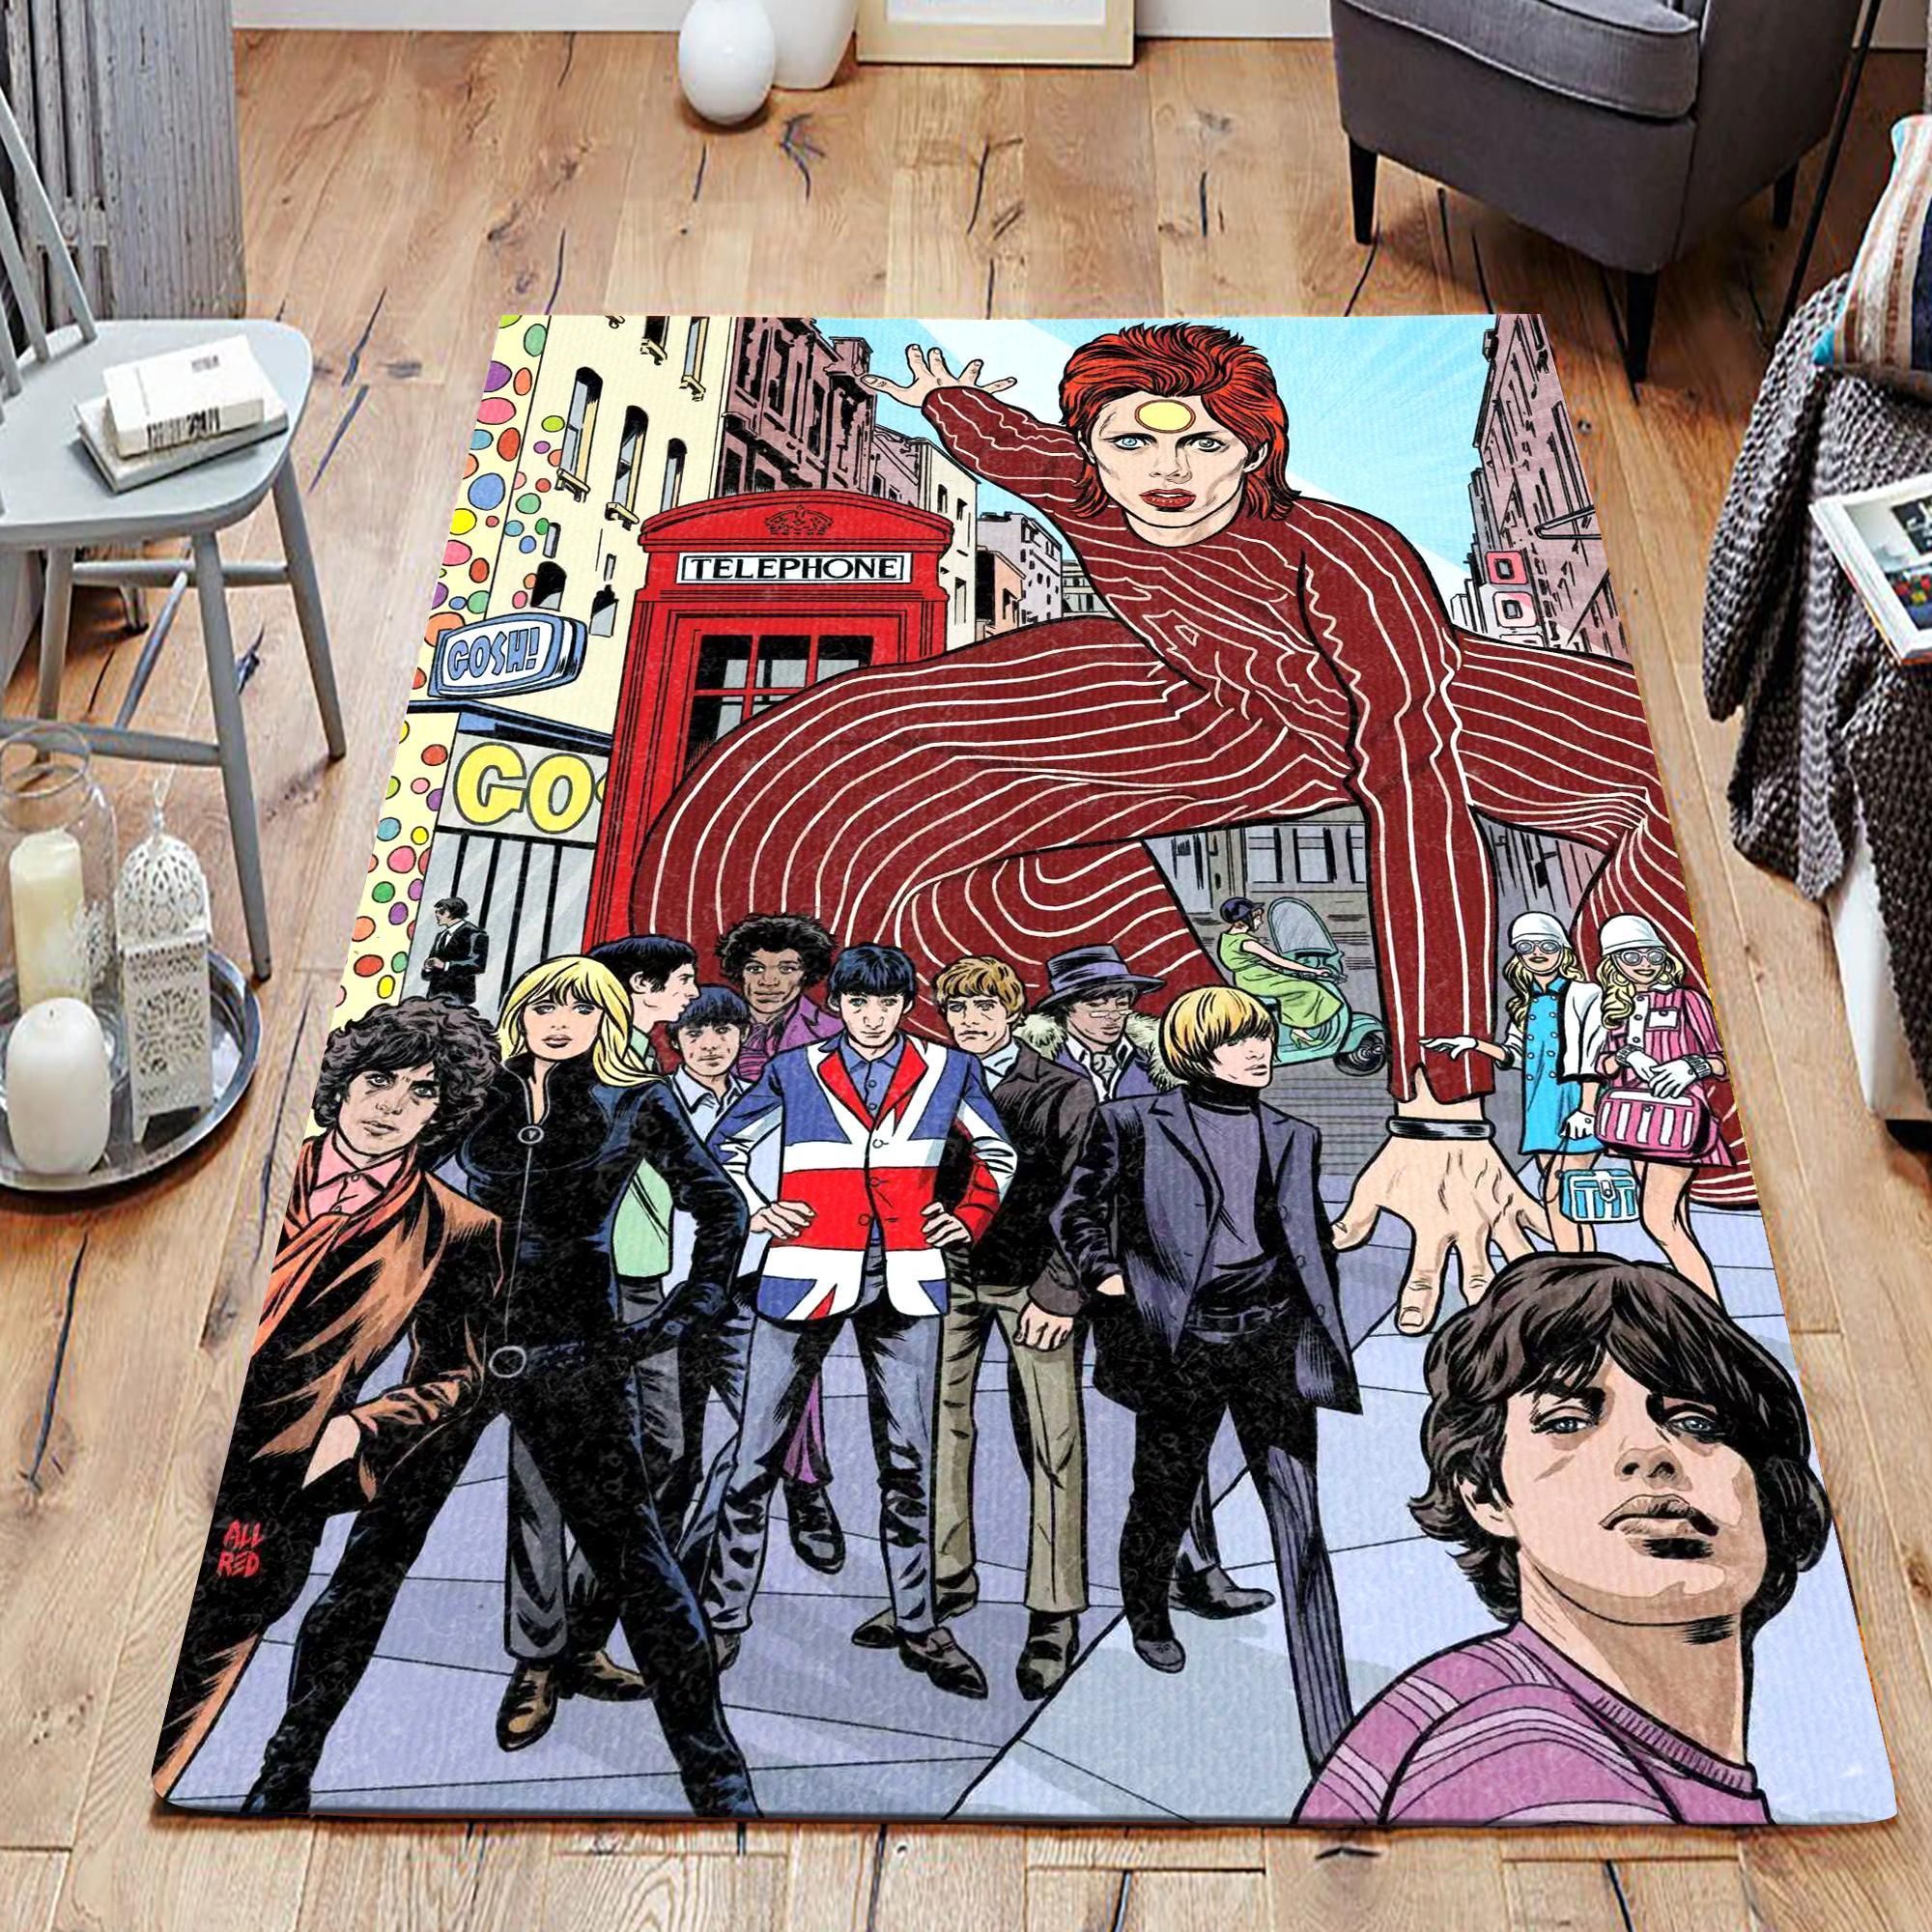 English Legendary Musicians Colorful Art David Bowie The Beatles Living Room Area Rug Carpet Christmas Gift US Decor - Indoor Outdoor Rugs